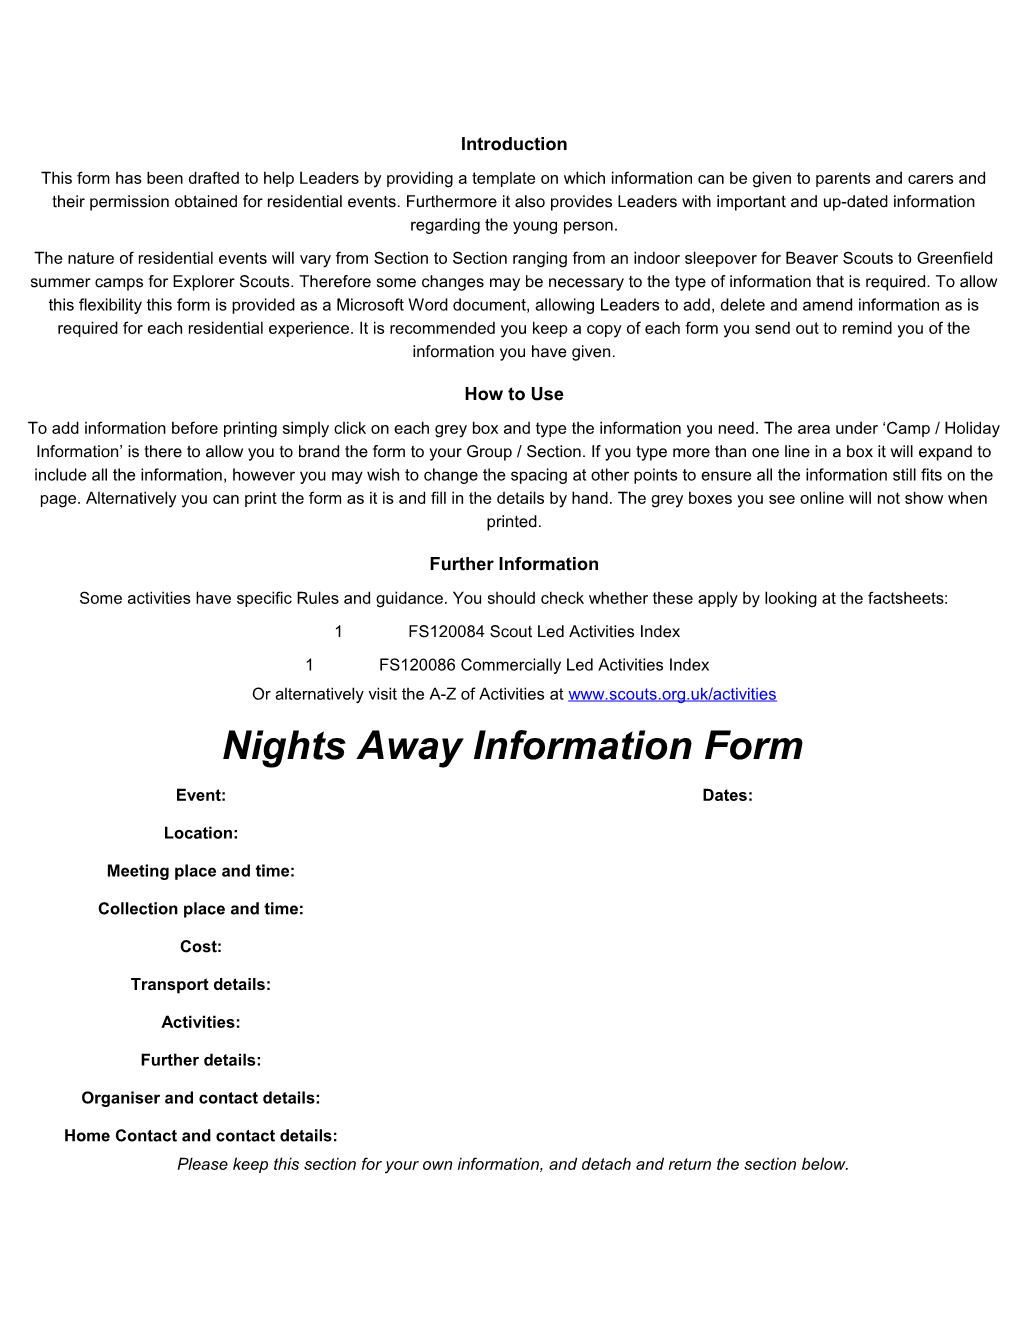 This Form Has Been Drafted to Help Leaders by Providing a Template on Which Information